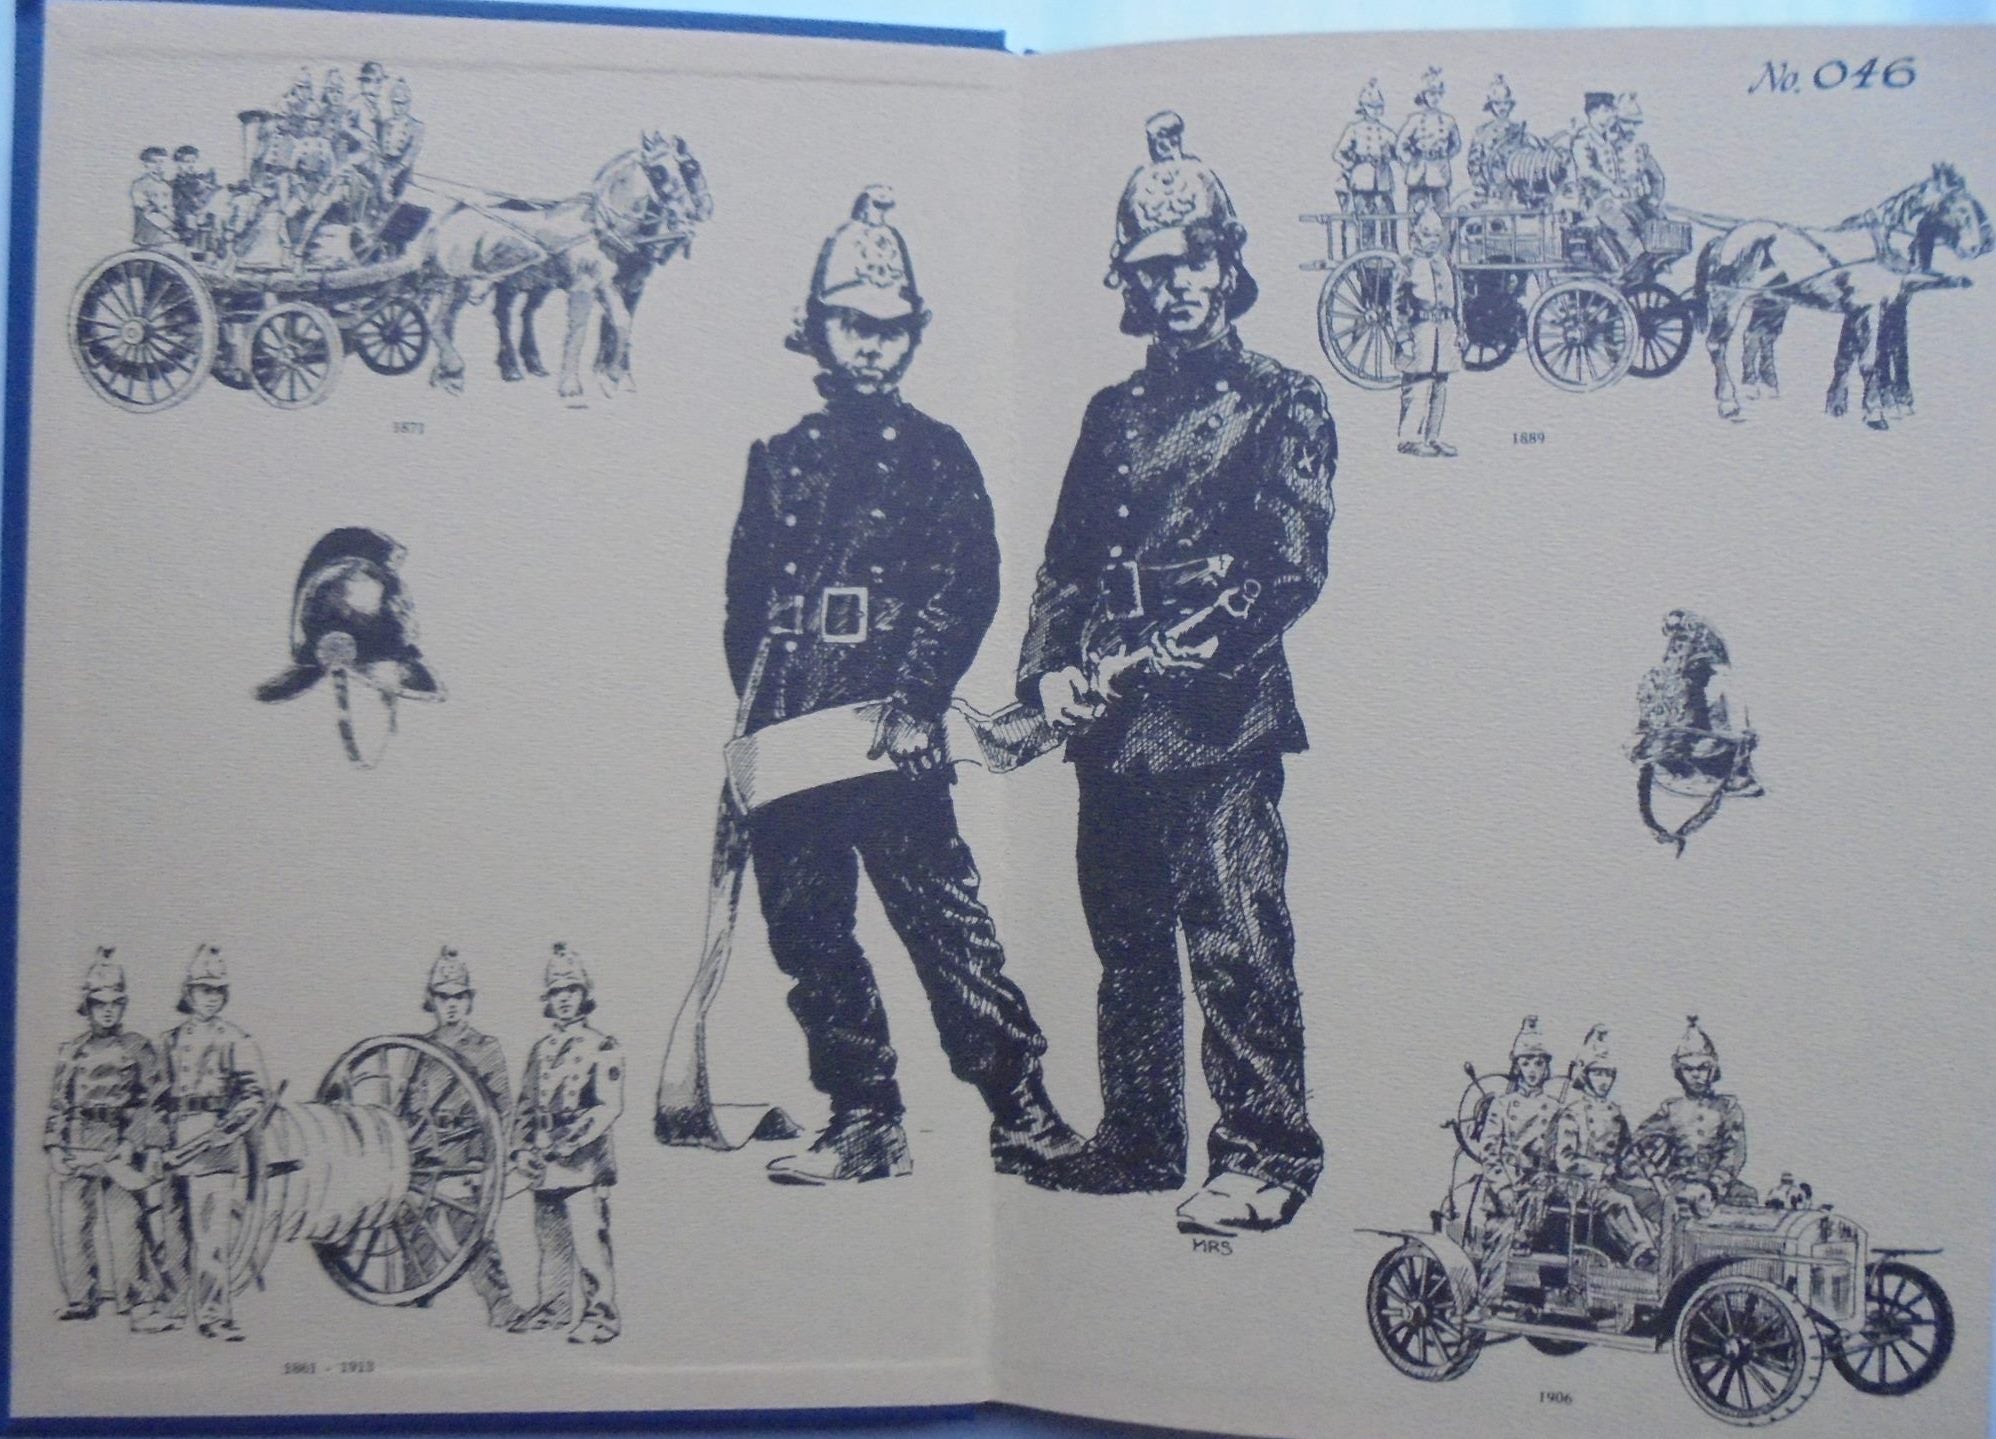 Always Ready: Christchurch Fire Brigade 1860-1985 by A.A Phillips.